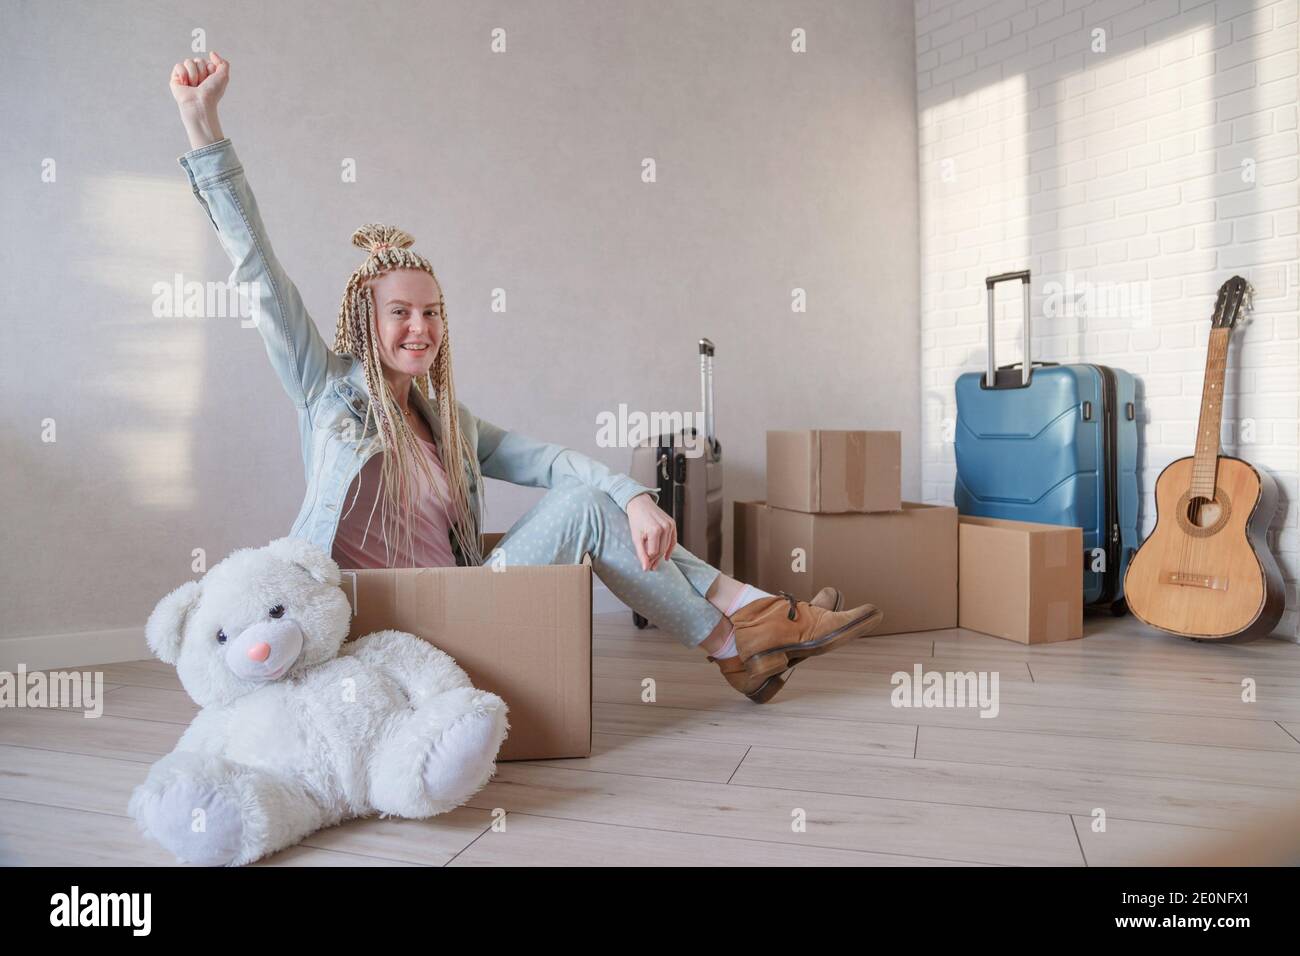 Young woman with pigtails is happy to move to new flat. Sits in a box with raised hand. Packed luggage and belongings and guitar on the background. Stock Photo